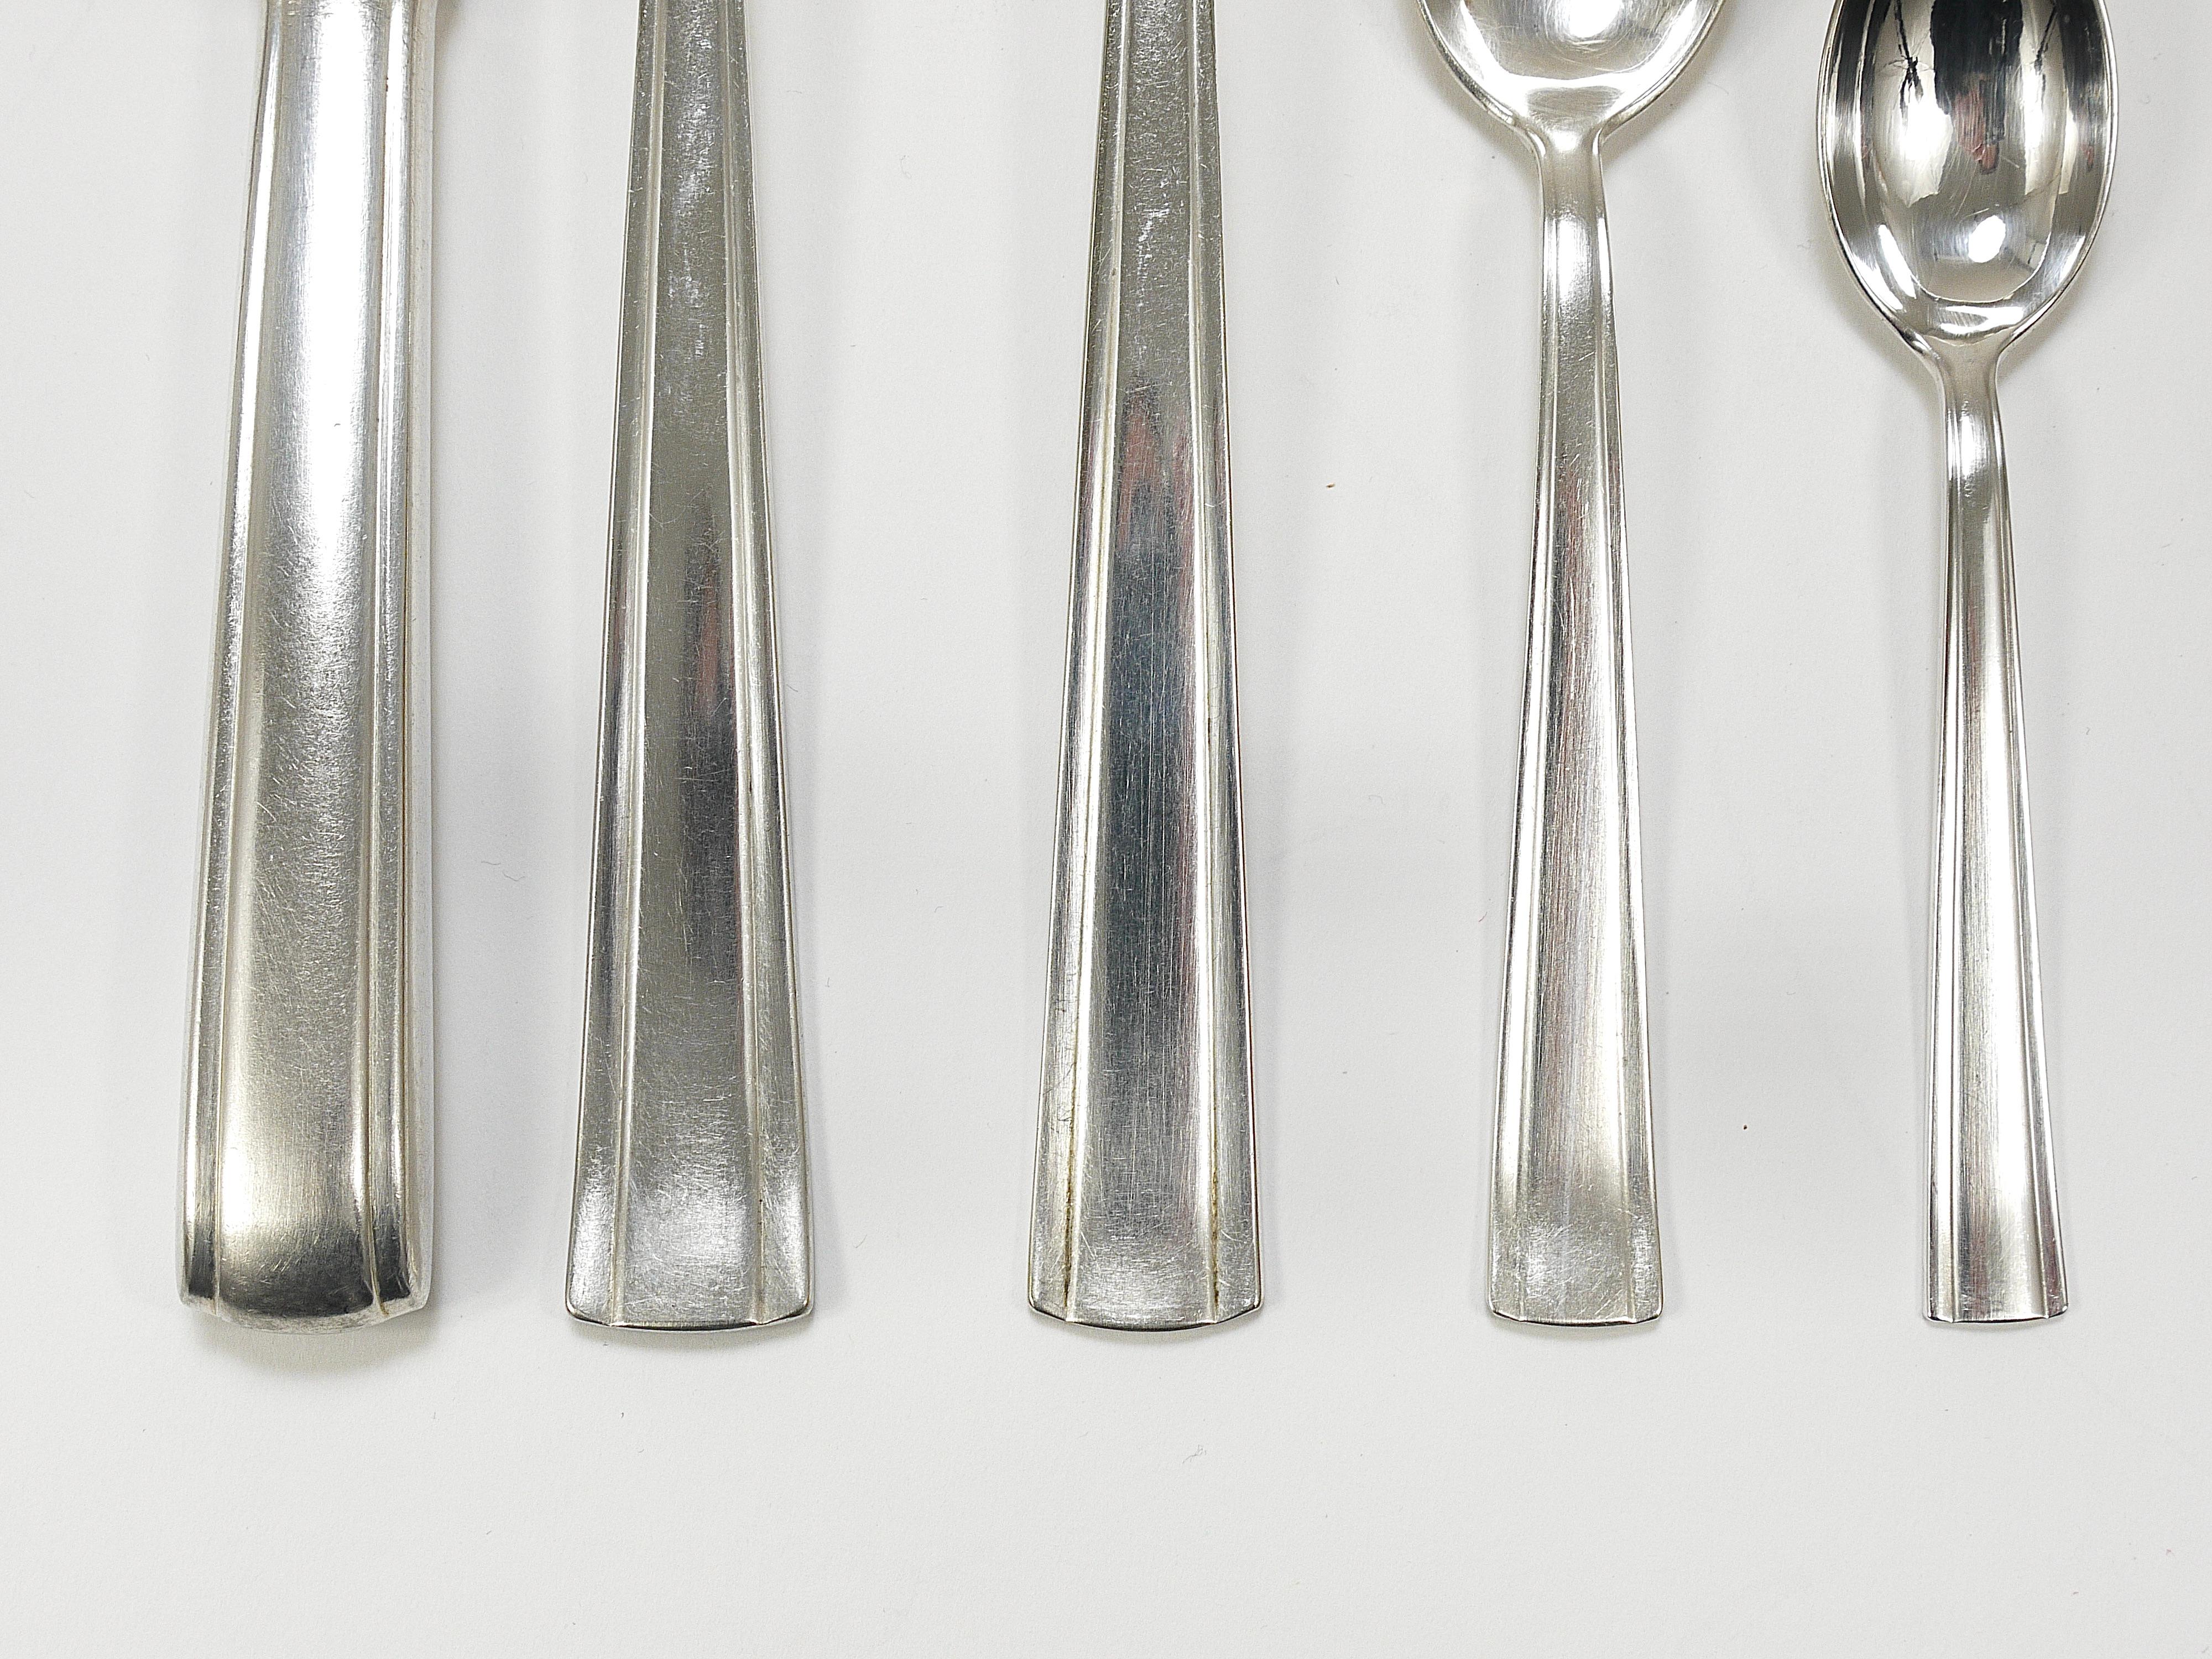 Gio Ponti for Krupp Silvered Flatware Cutlery for Six, 31 pcs., Austria, 1950s For Sale 1